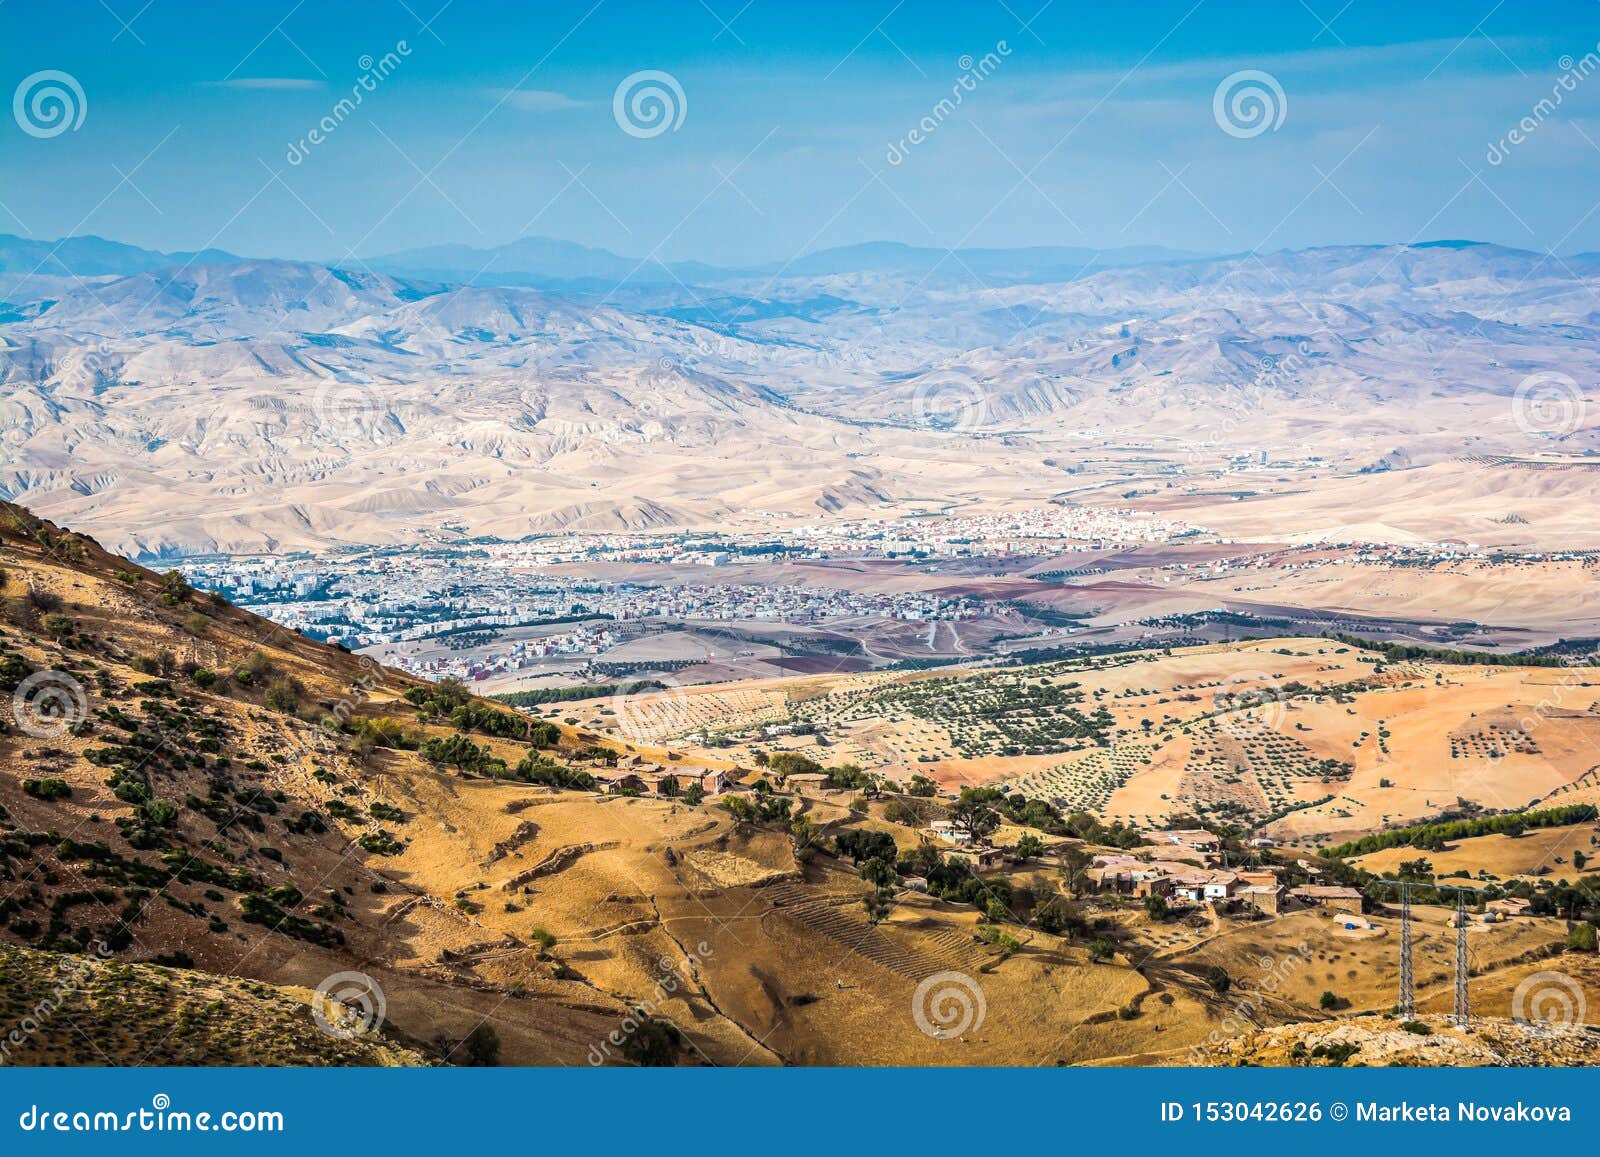 panoramic view on the city of taza in morocco of national park tazekka